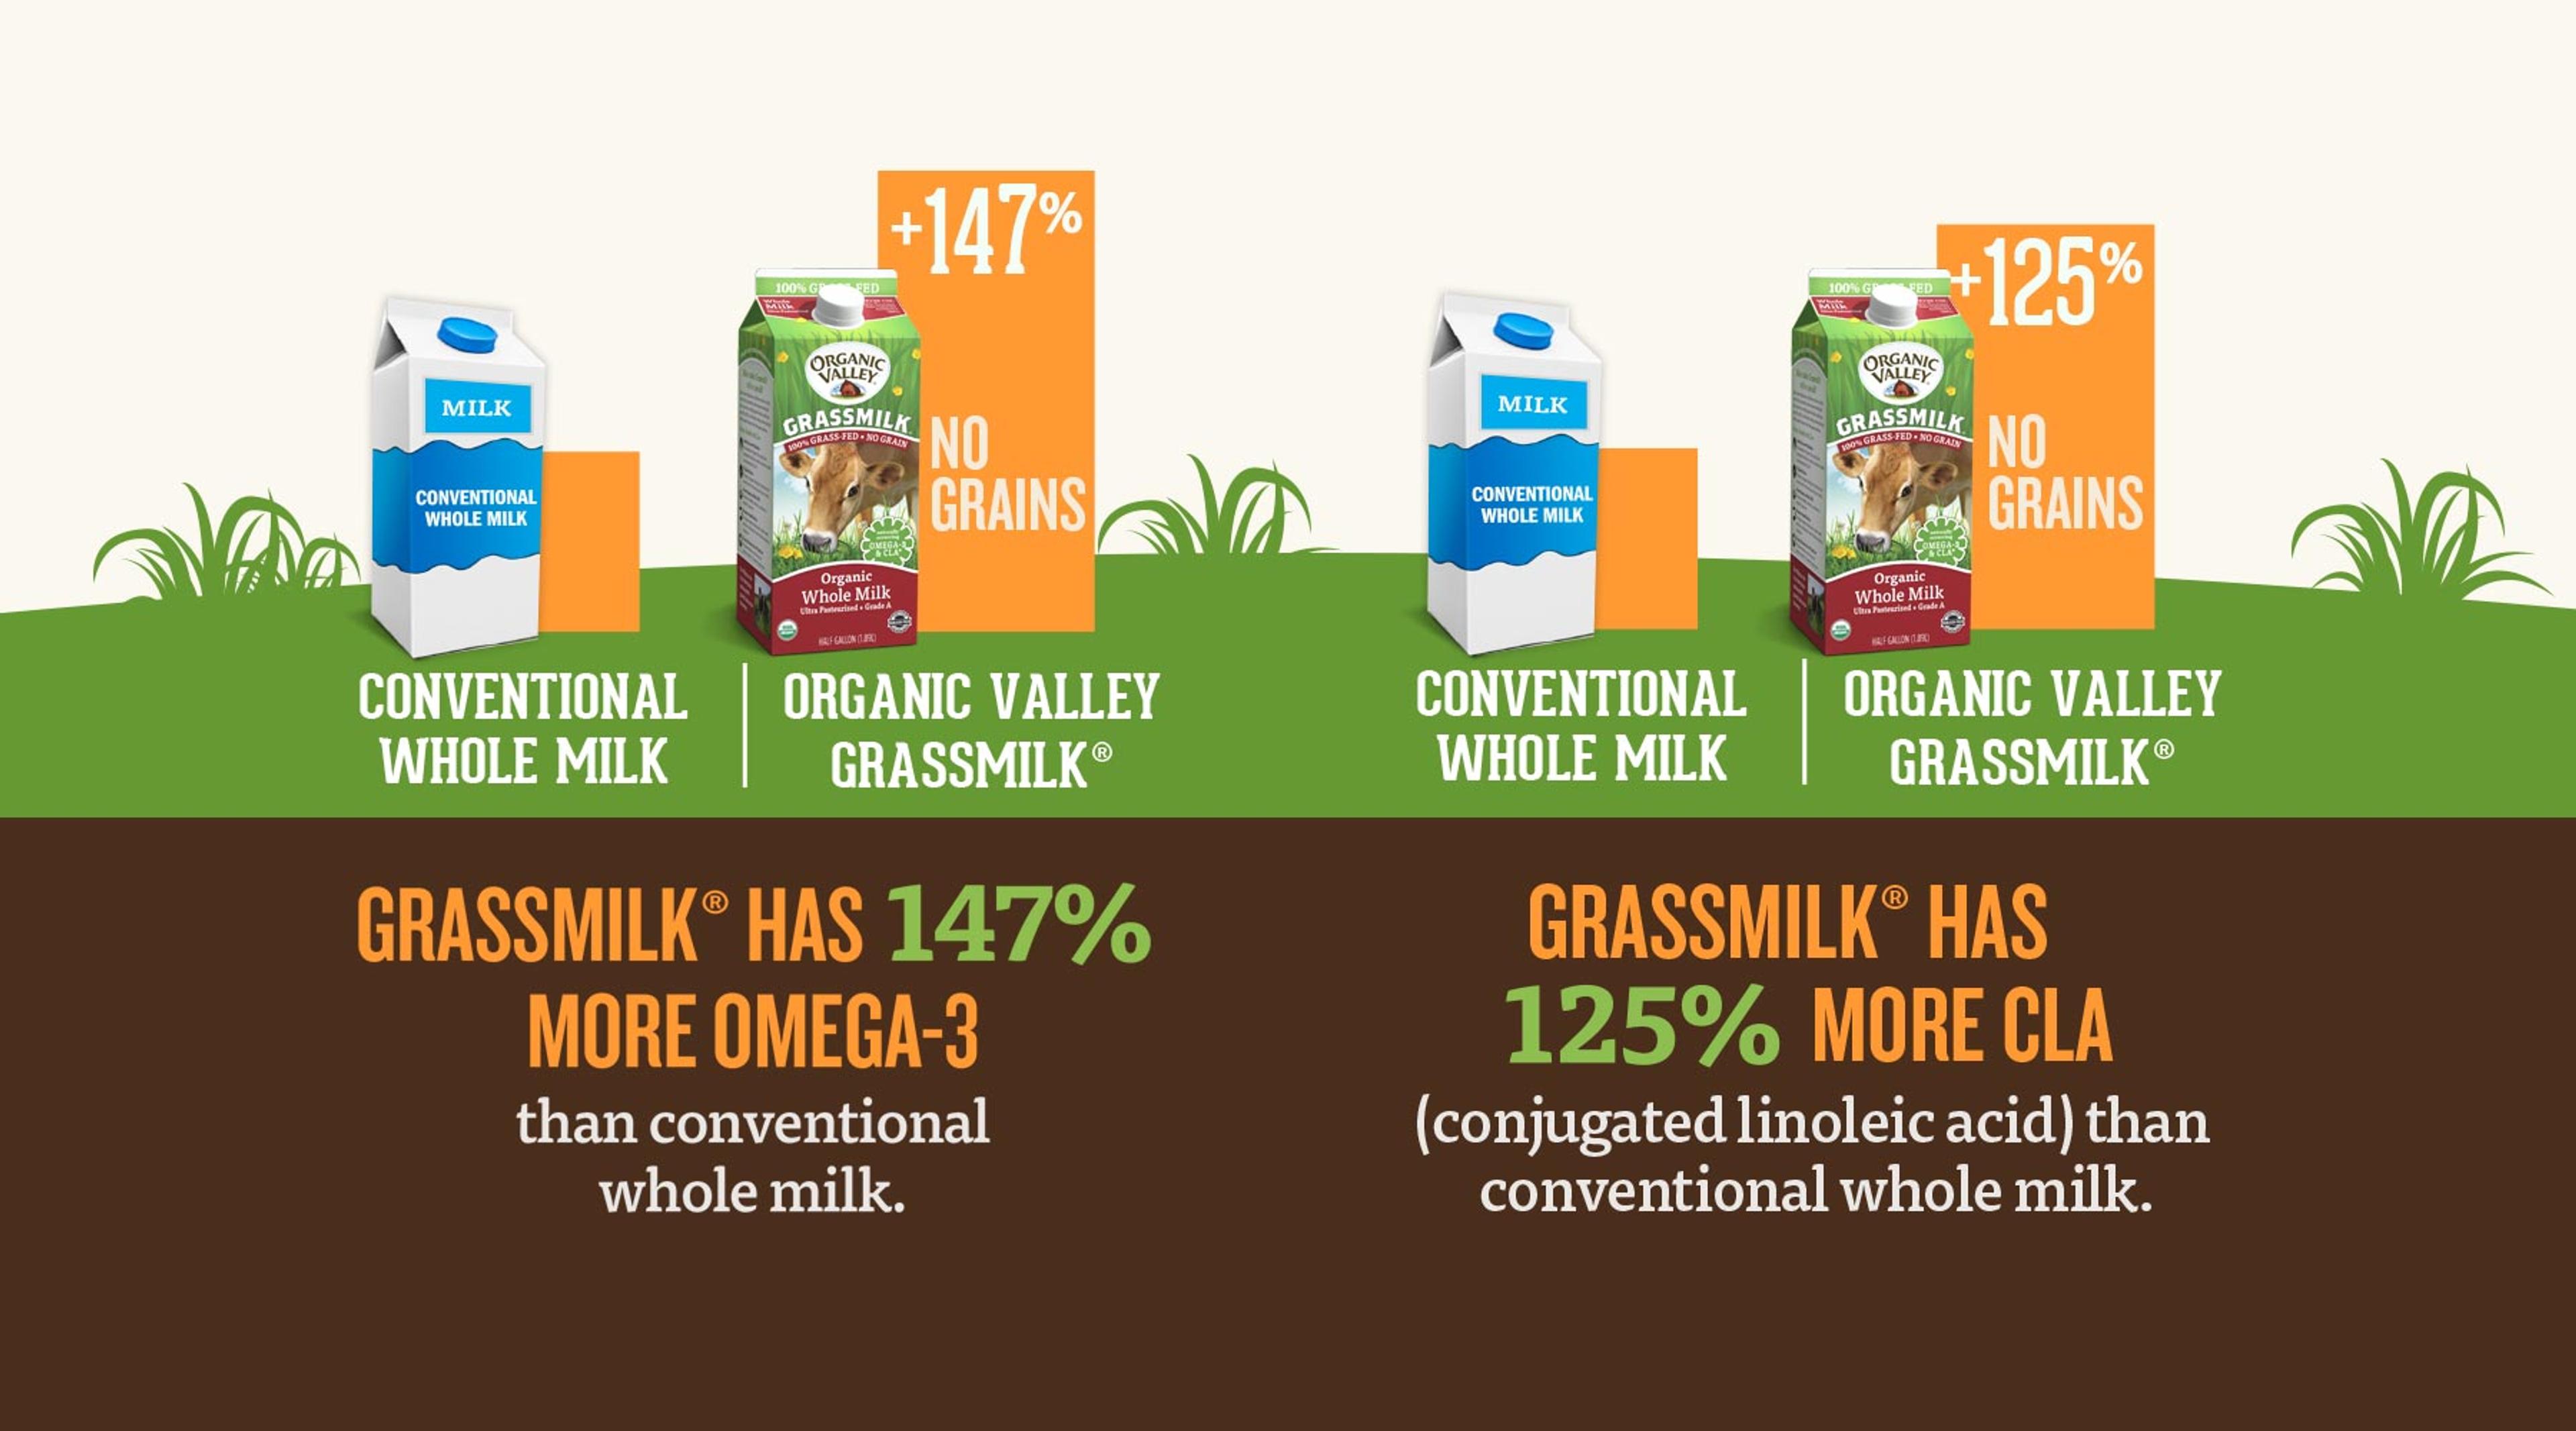 Chart showing the difference in omega-3 and CLA content between conventional milk and Organic Valley Grassmilk.